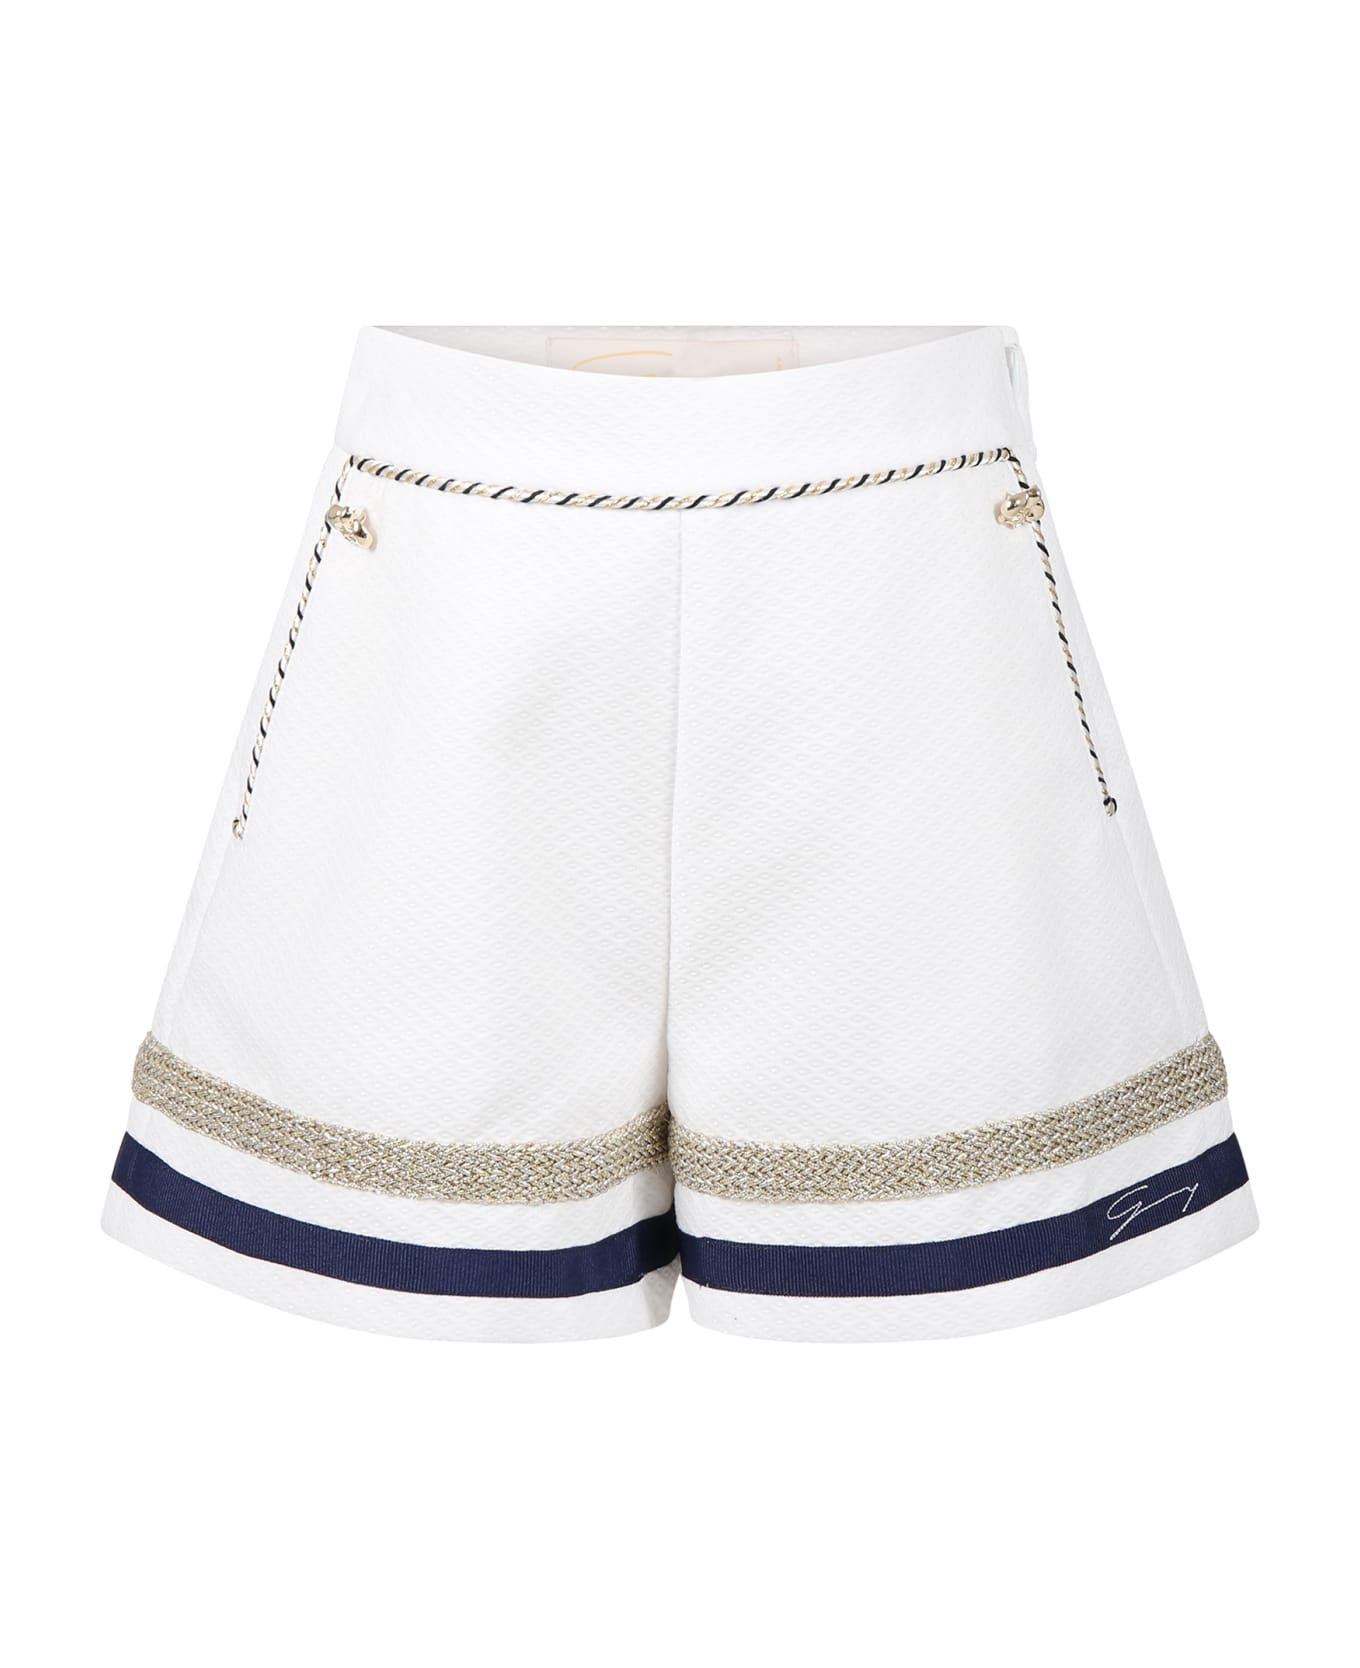 Genny White Shorts For Girl With Blue And Lurex Details - White